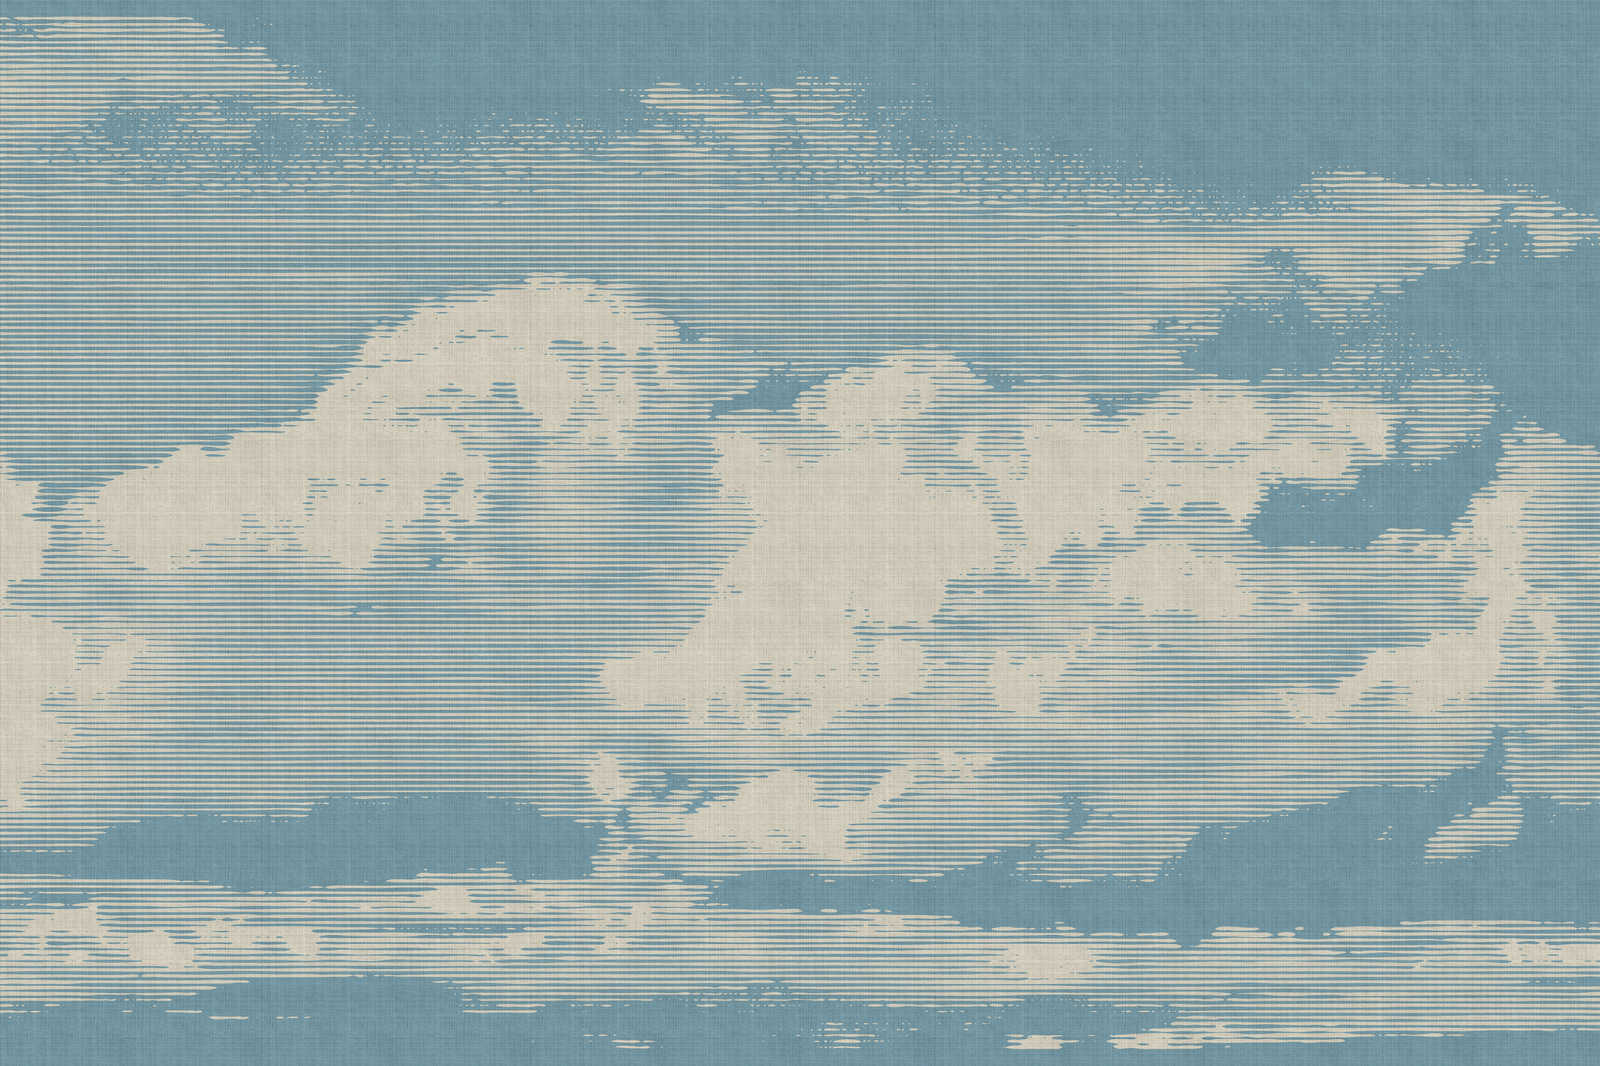             Clouds 1 - Heavenly canvas picture with cloud motif in natural linen look - 0.90 m x 0.60 m
        